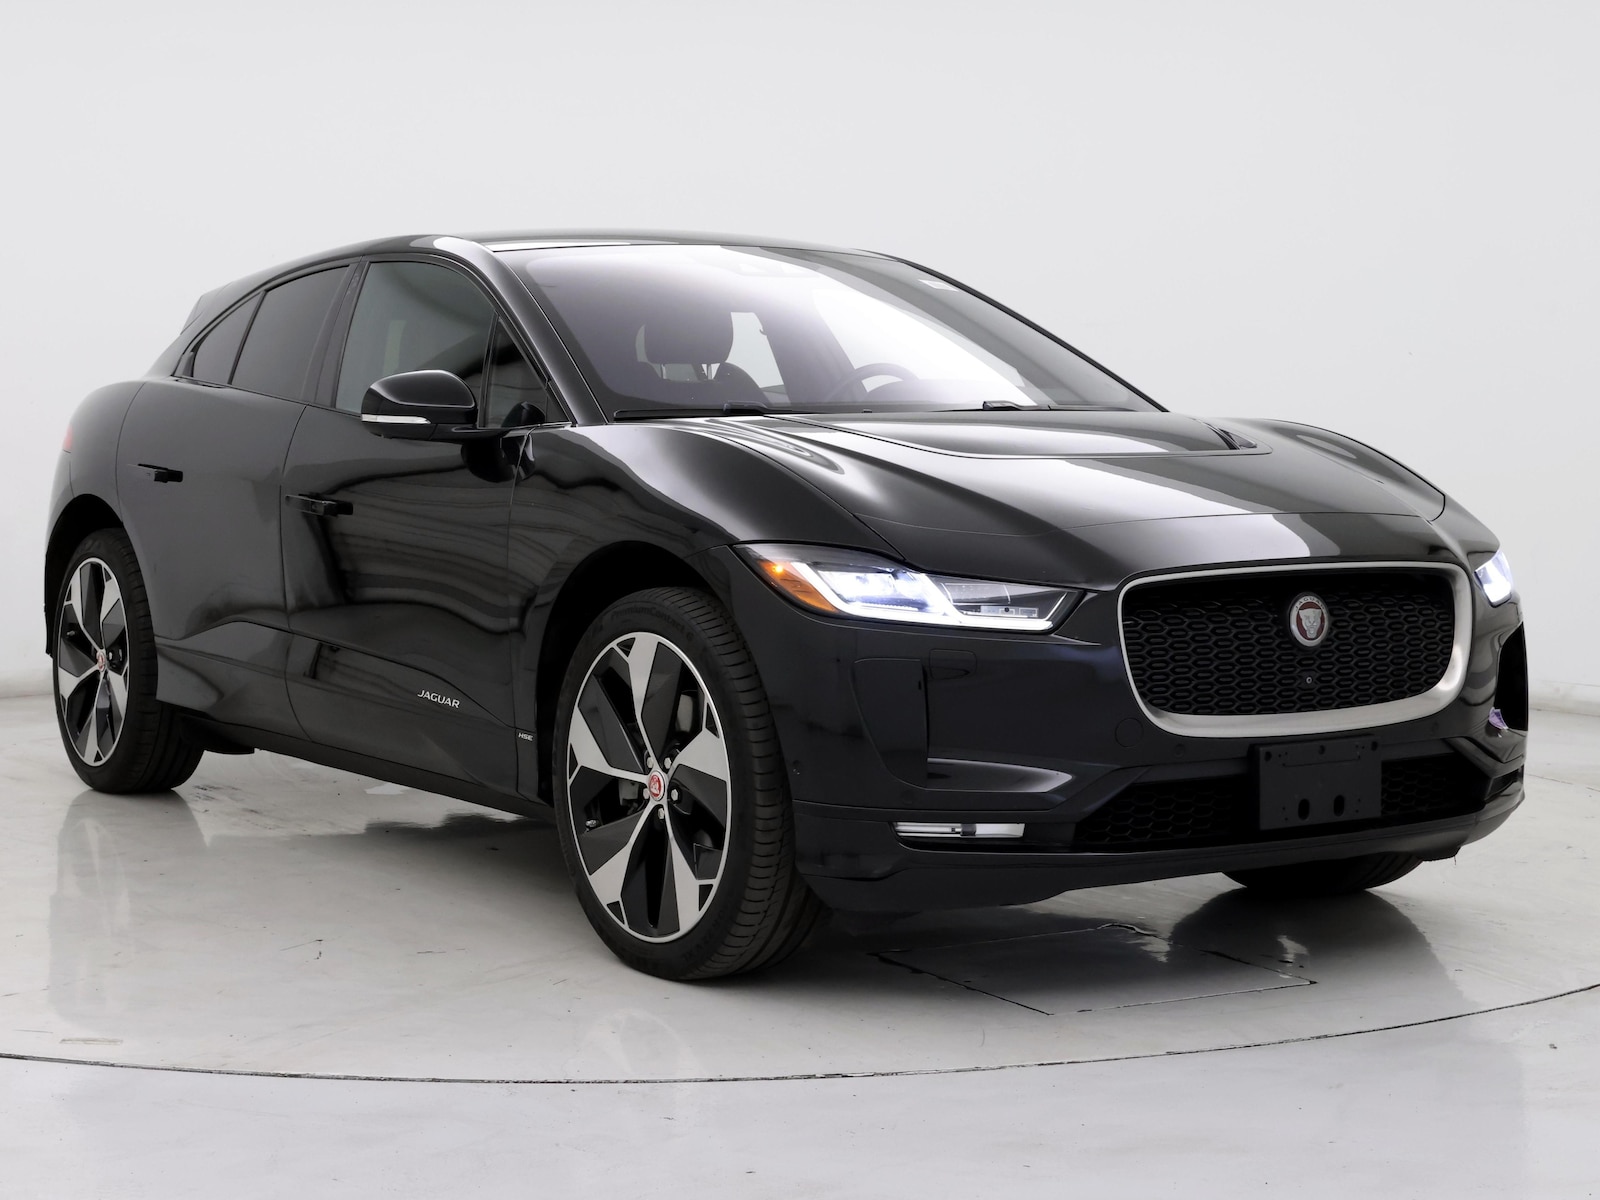 Used 2019 Jaguar I-PACE First Edition with VIN SADHD2S12K1F64035 for sale in Kenosha, WI